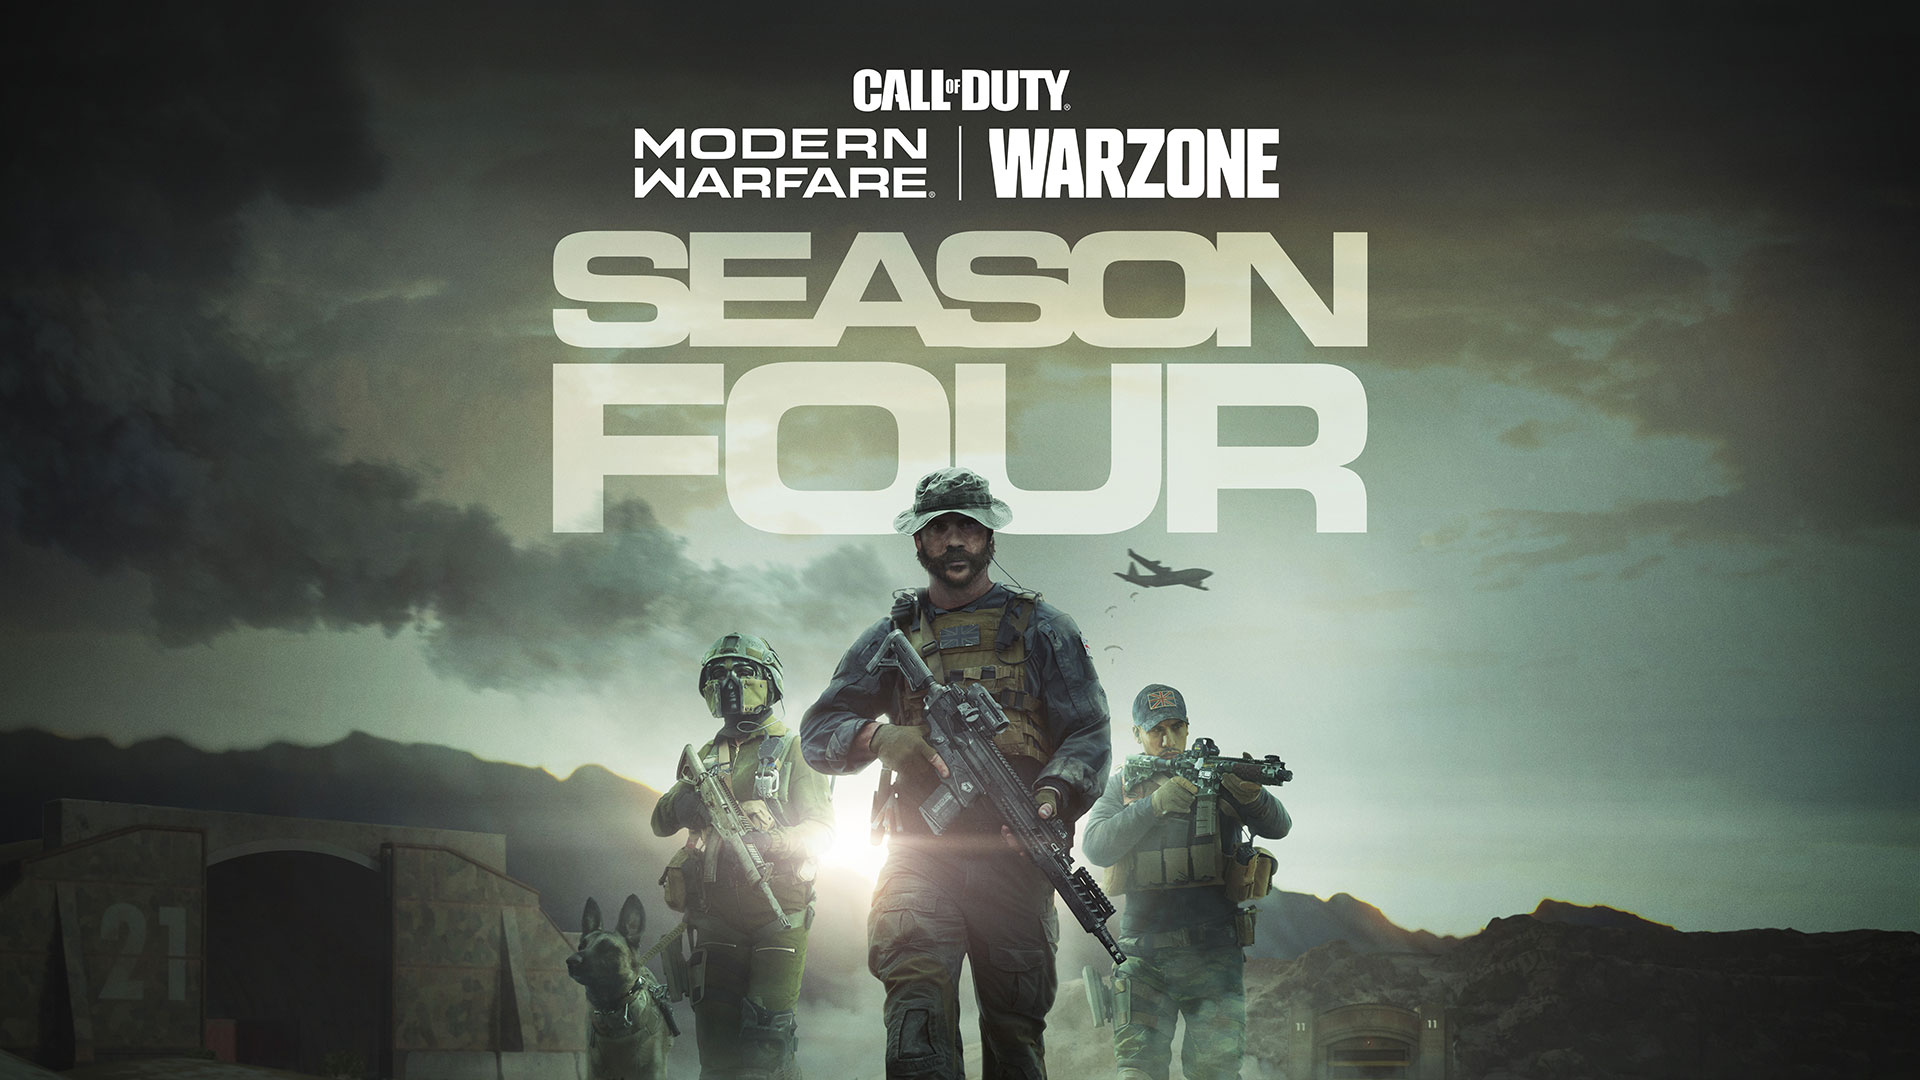 Biggest changes to Call of Duty: Modern Warfare and Warzone in season 4.